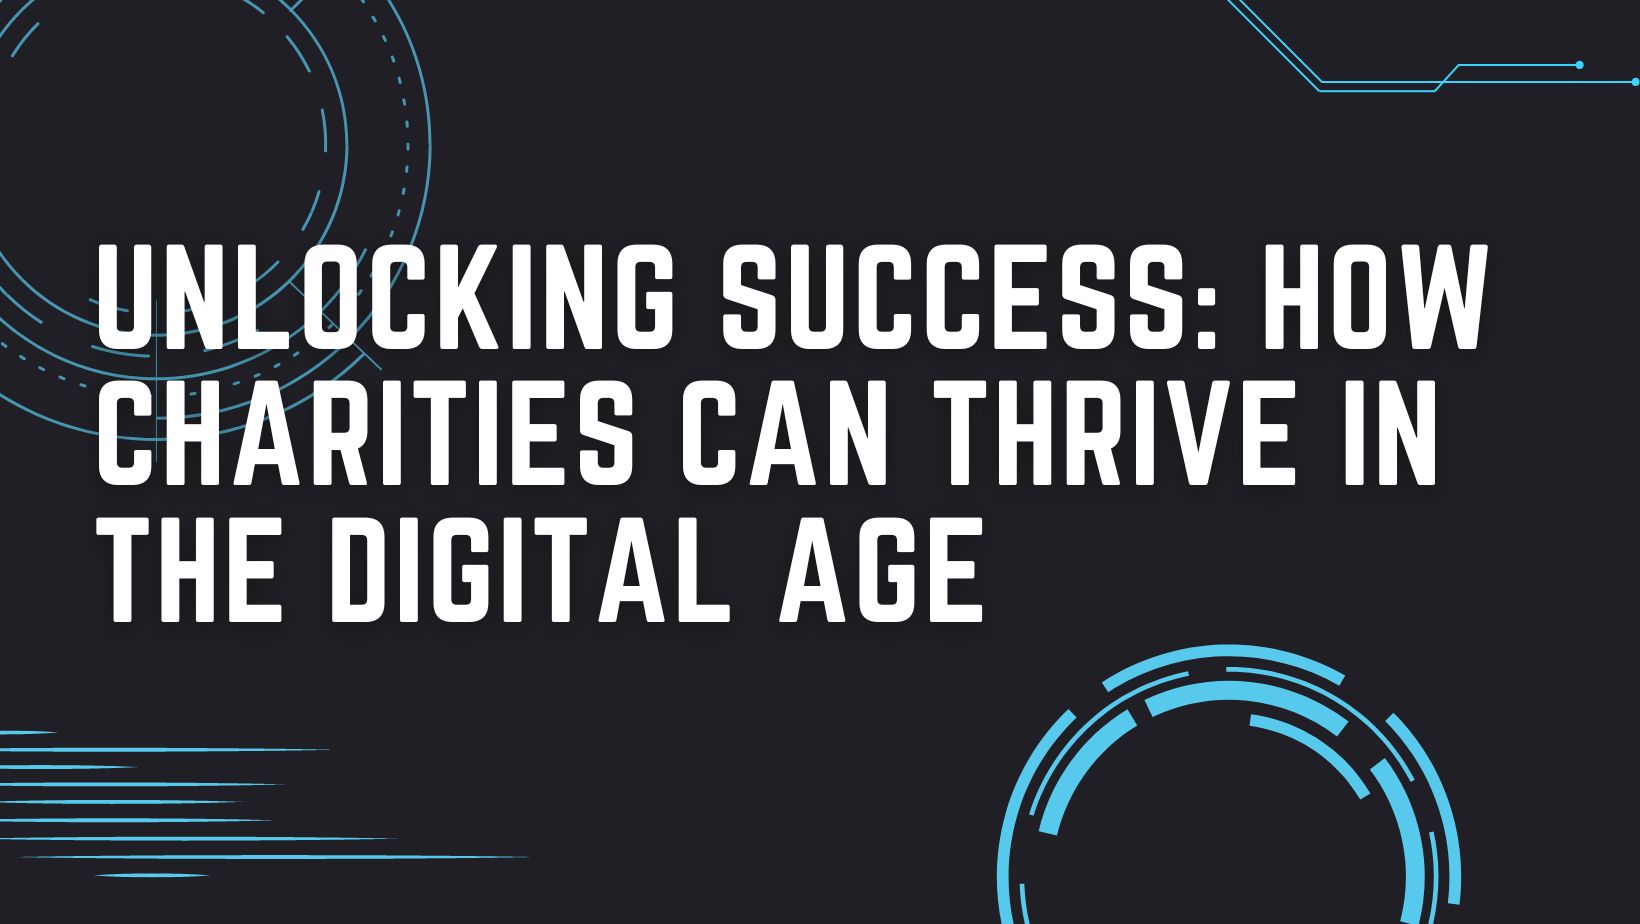 Unlocking Success: How Charities Can Thrive in the Digital Age